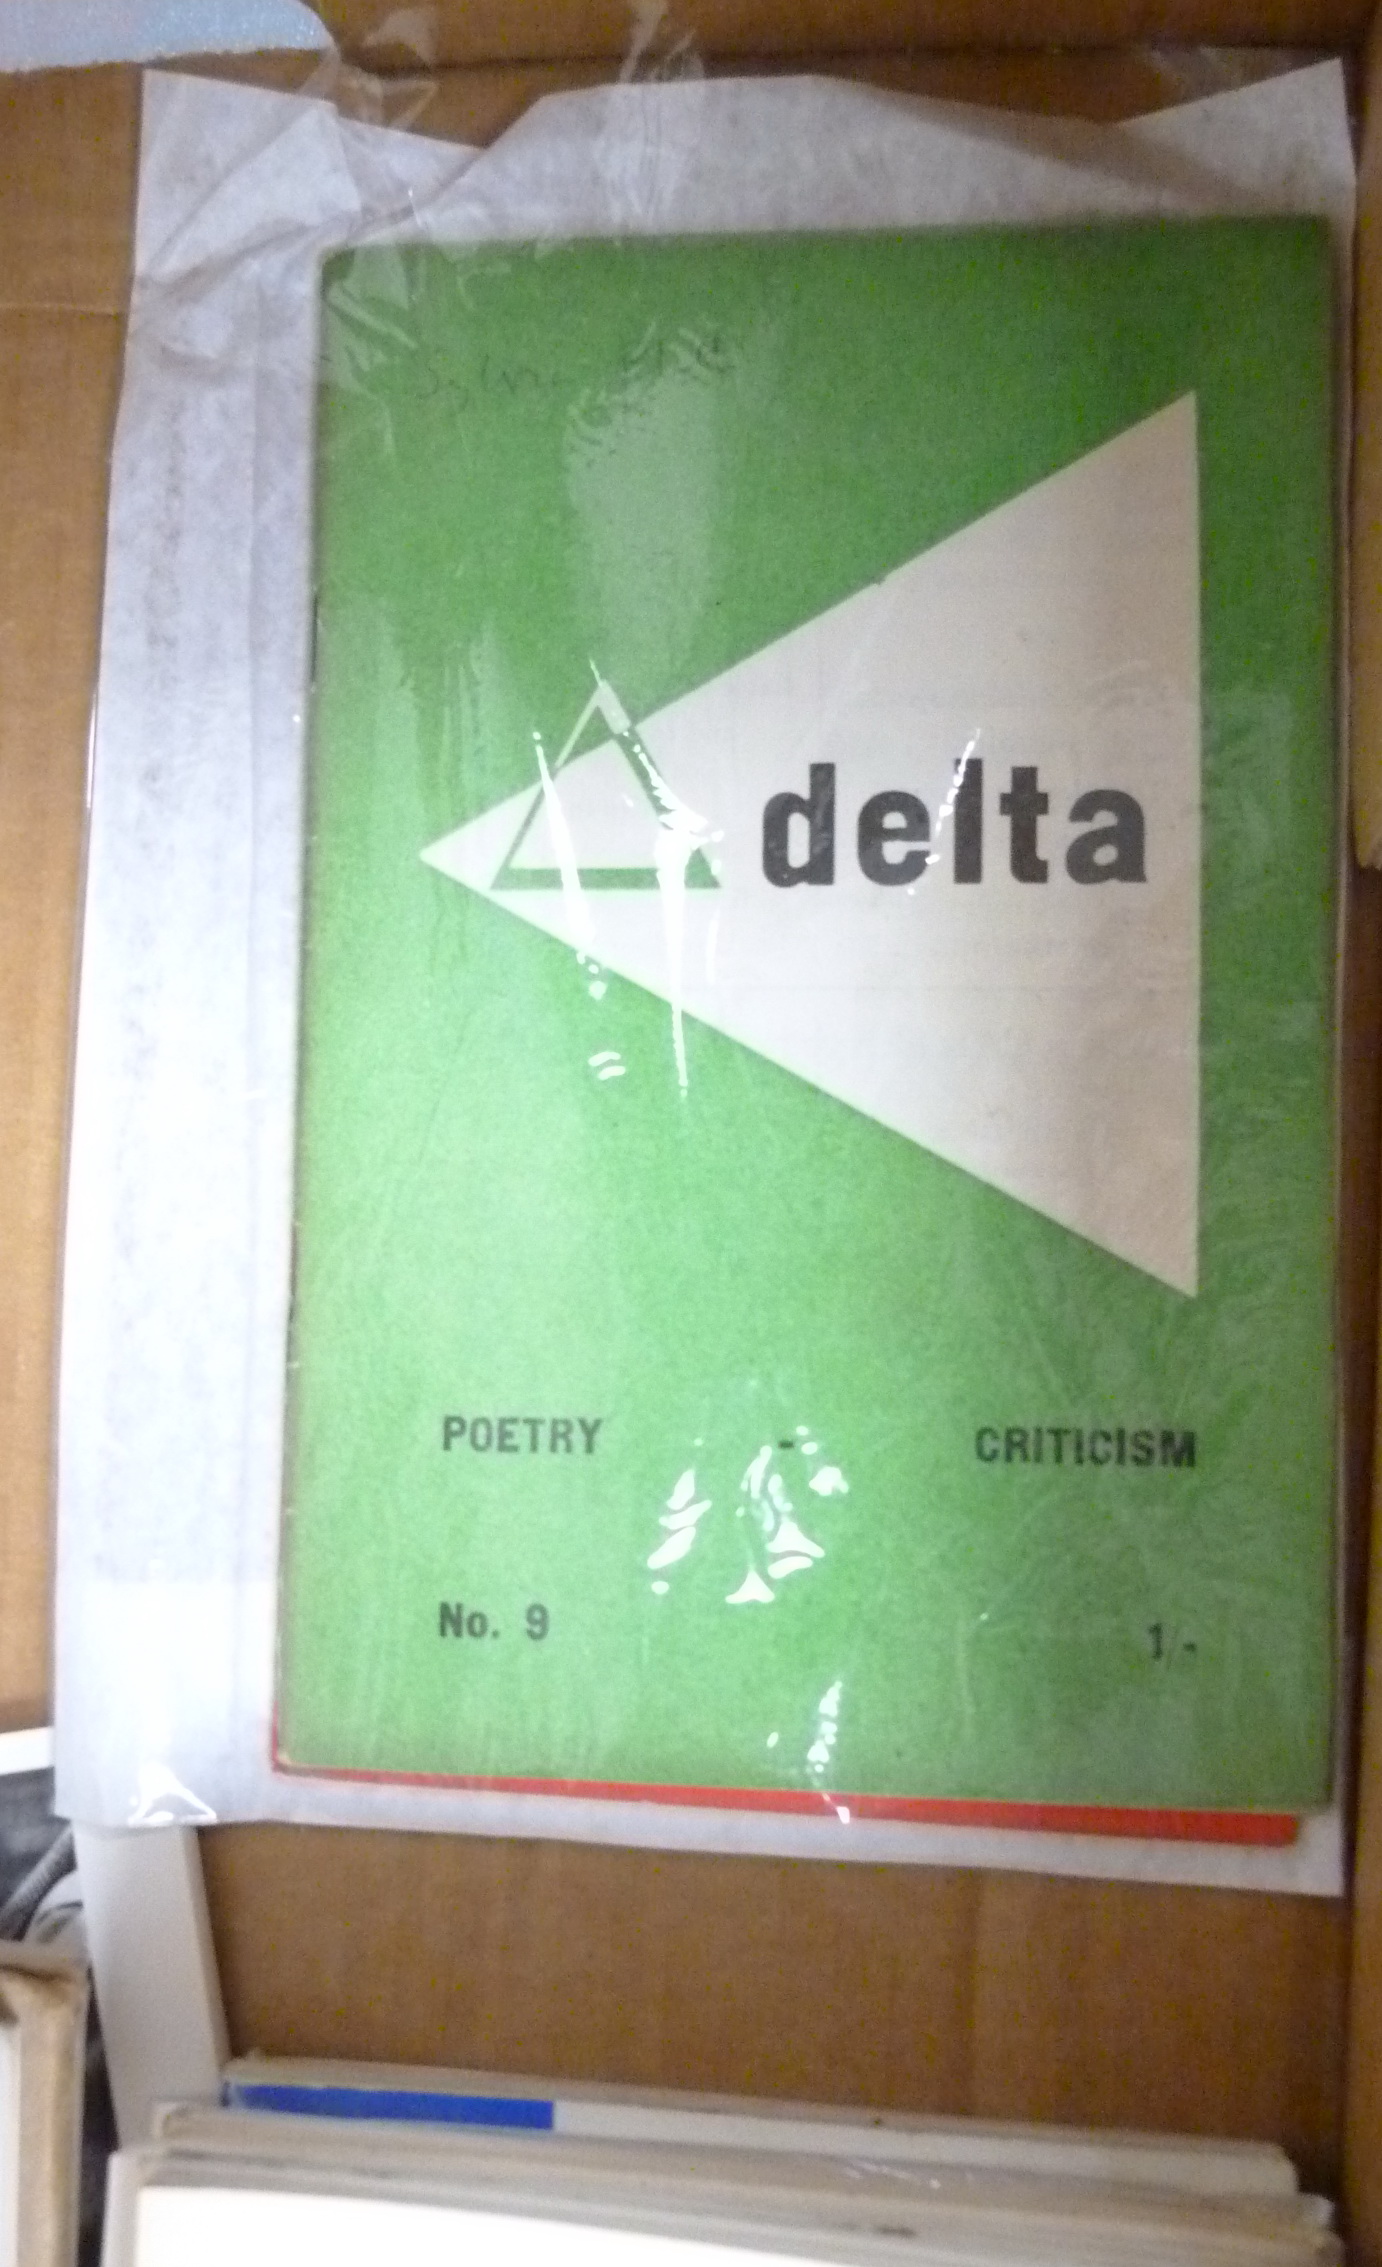 Literary Periodicals.  2 issues of Cambridge periodical Delta with Sylvia Plath (No. 9, Summer 1956) - Image 2 of 4